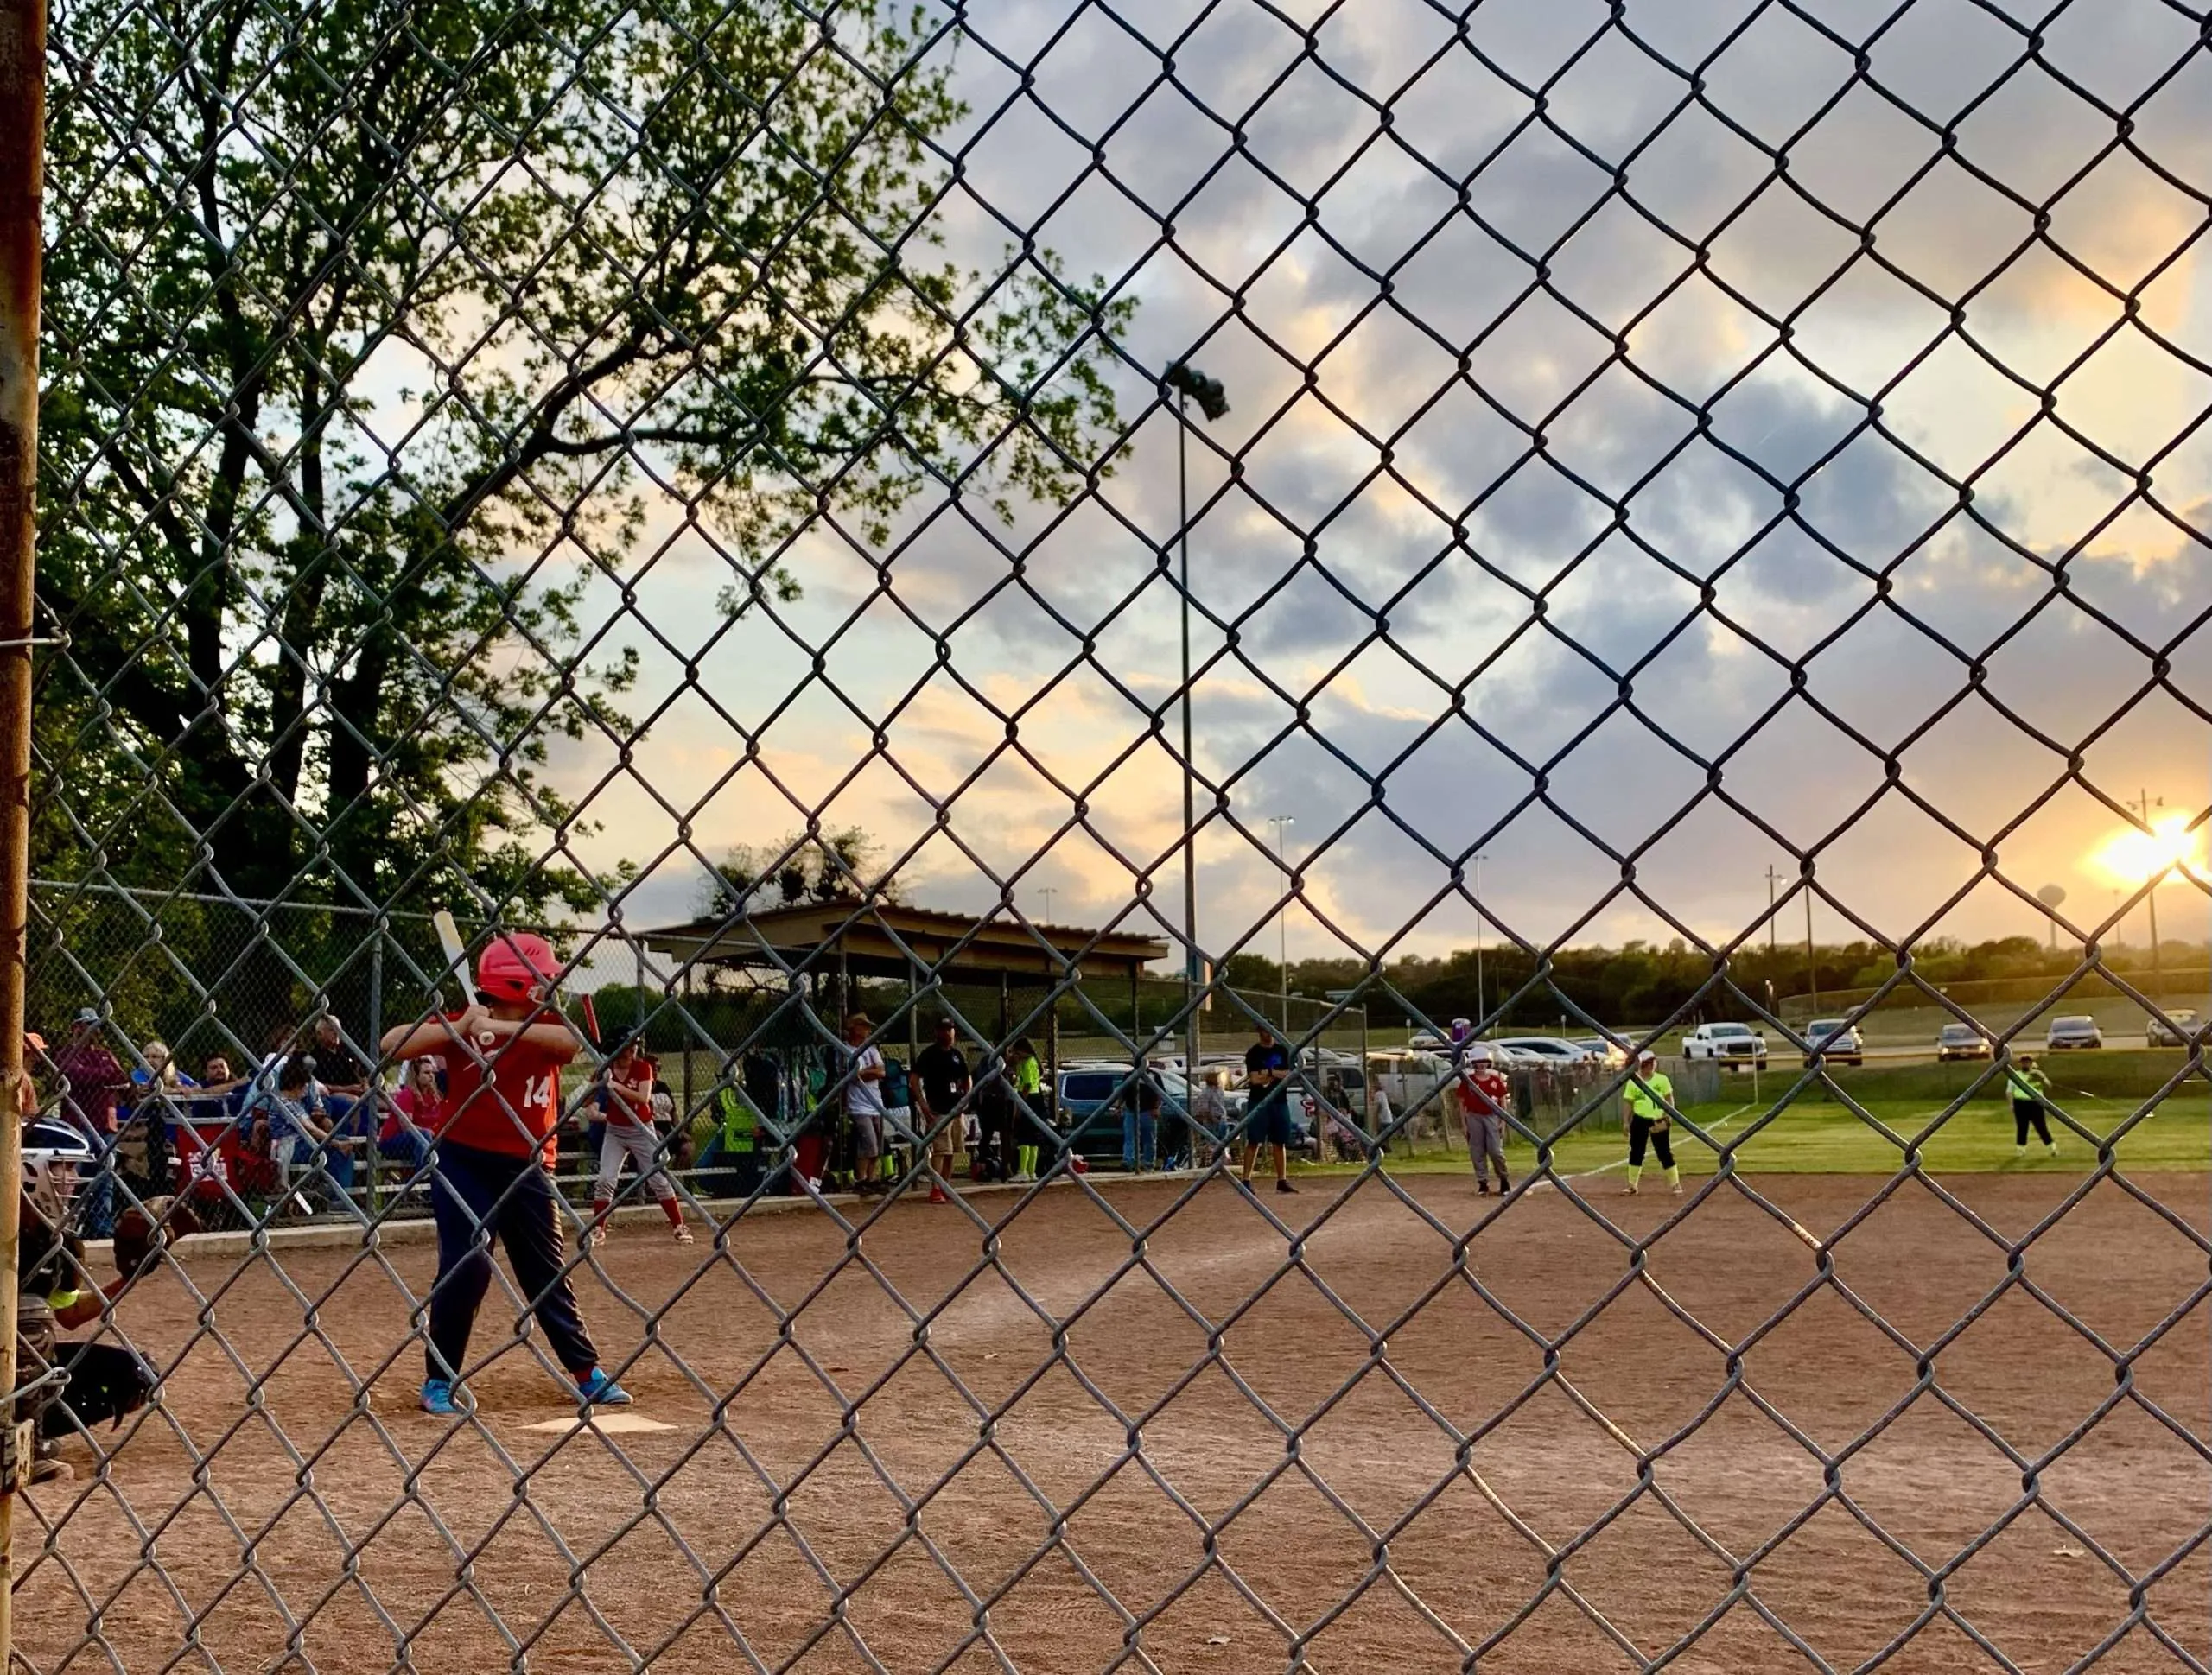 Deployment Update: Watched my girl play softball.